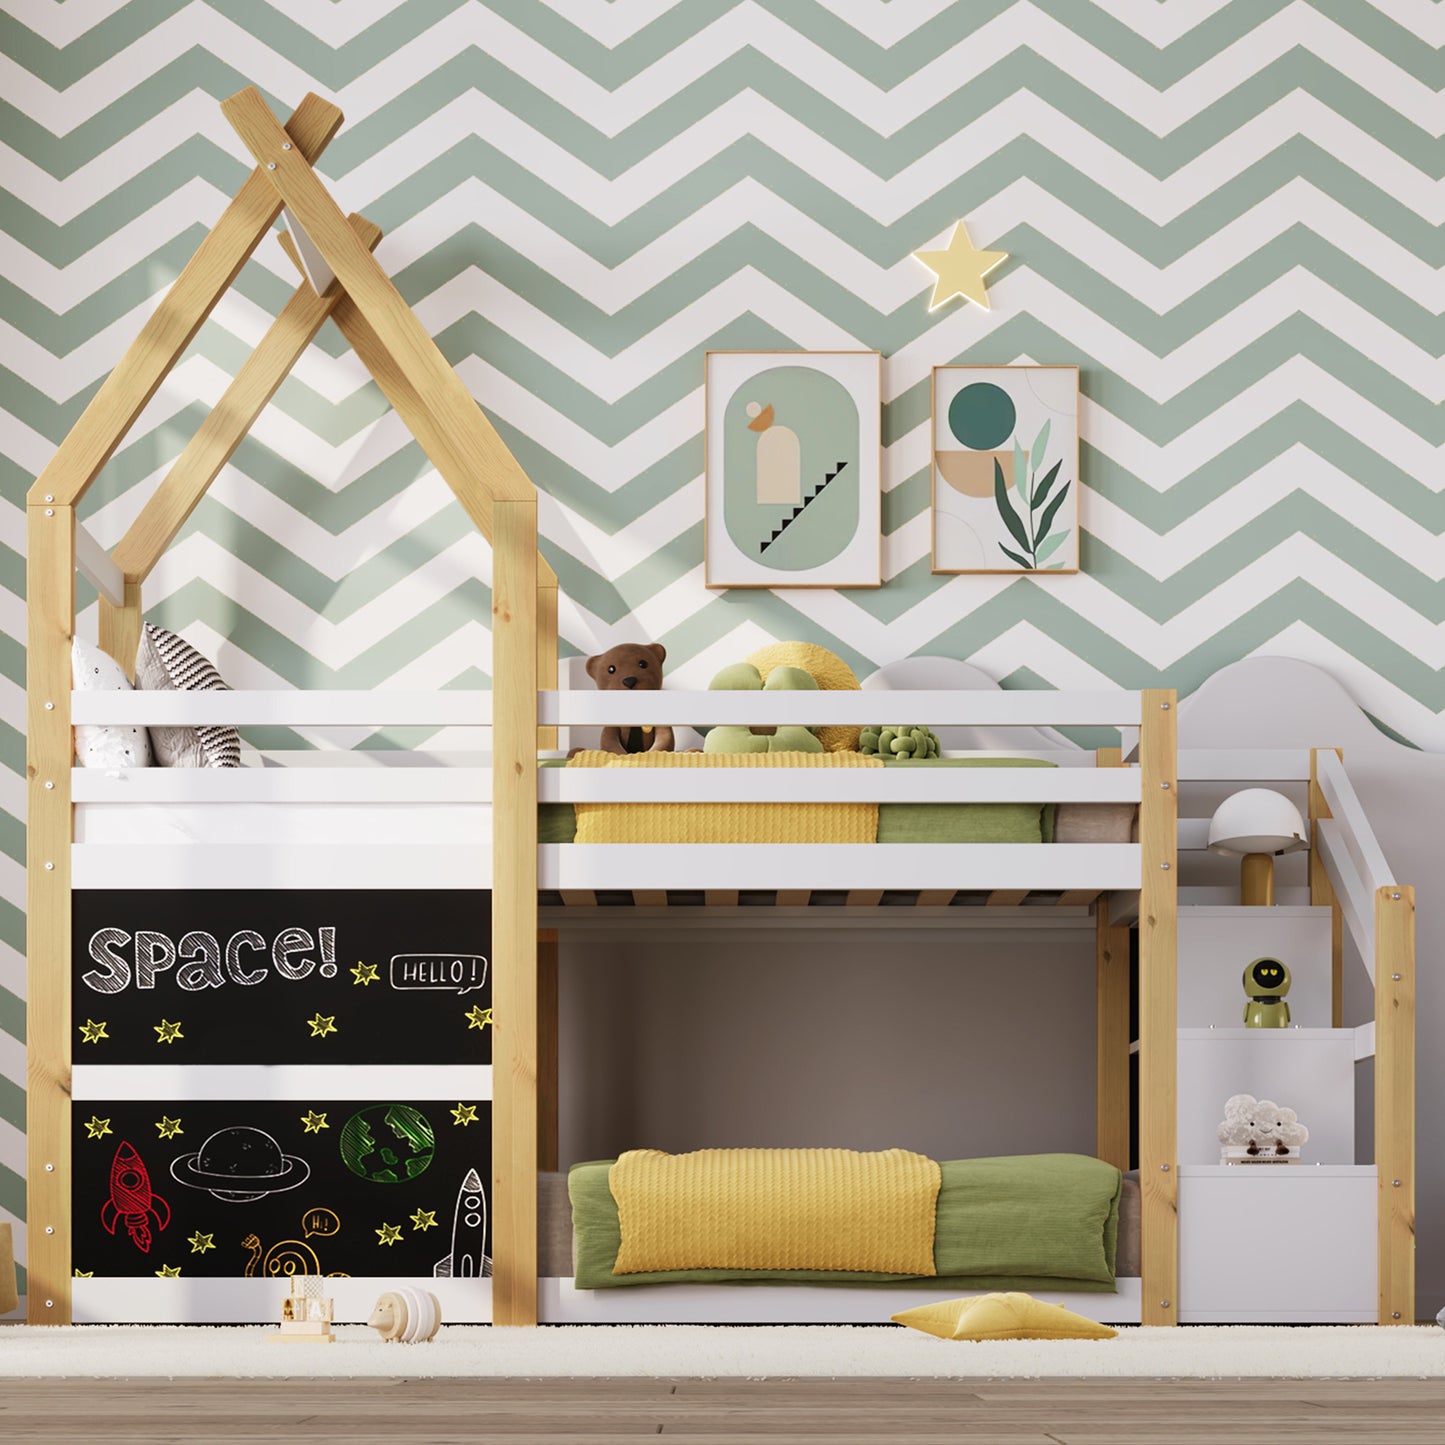 Twin over Twin House Bunk Bed with White Storage Staircase and 2 Blackboards, White and Natural